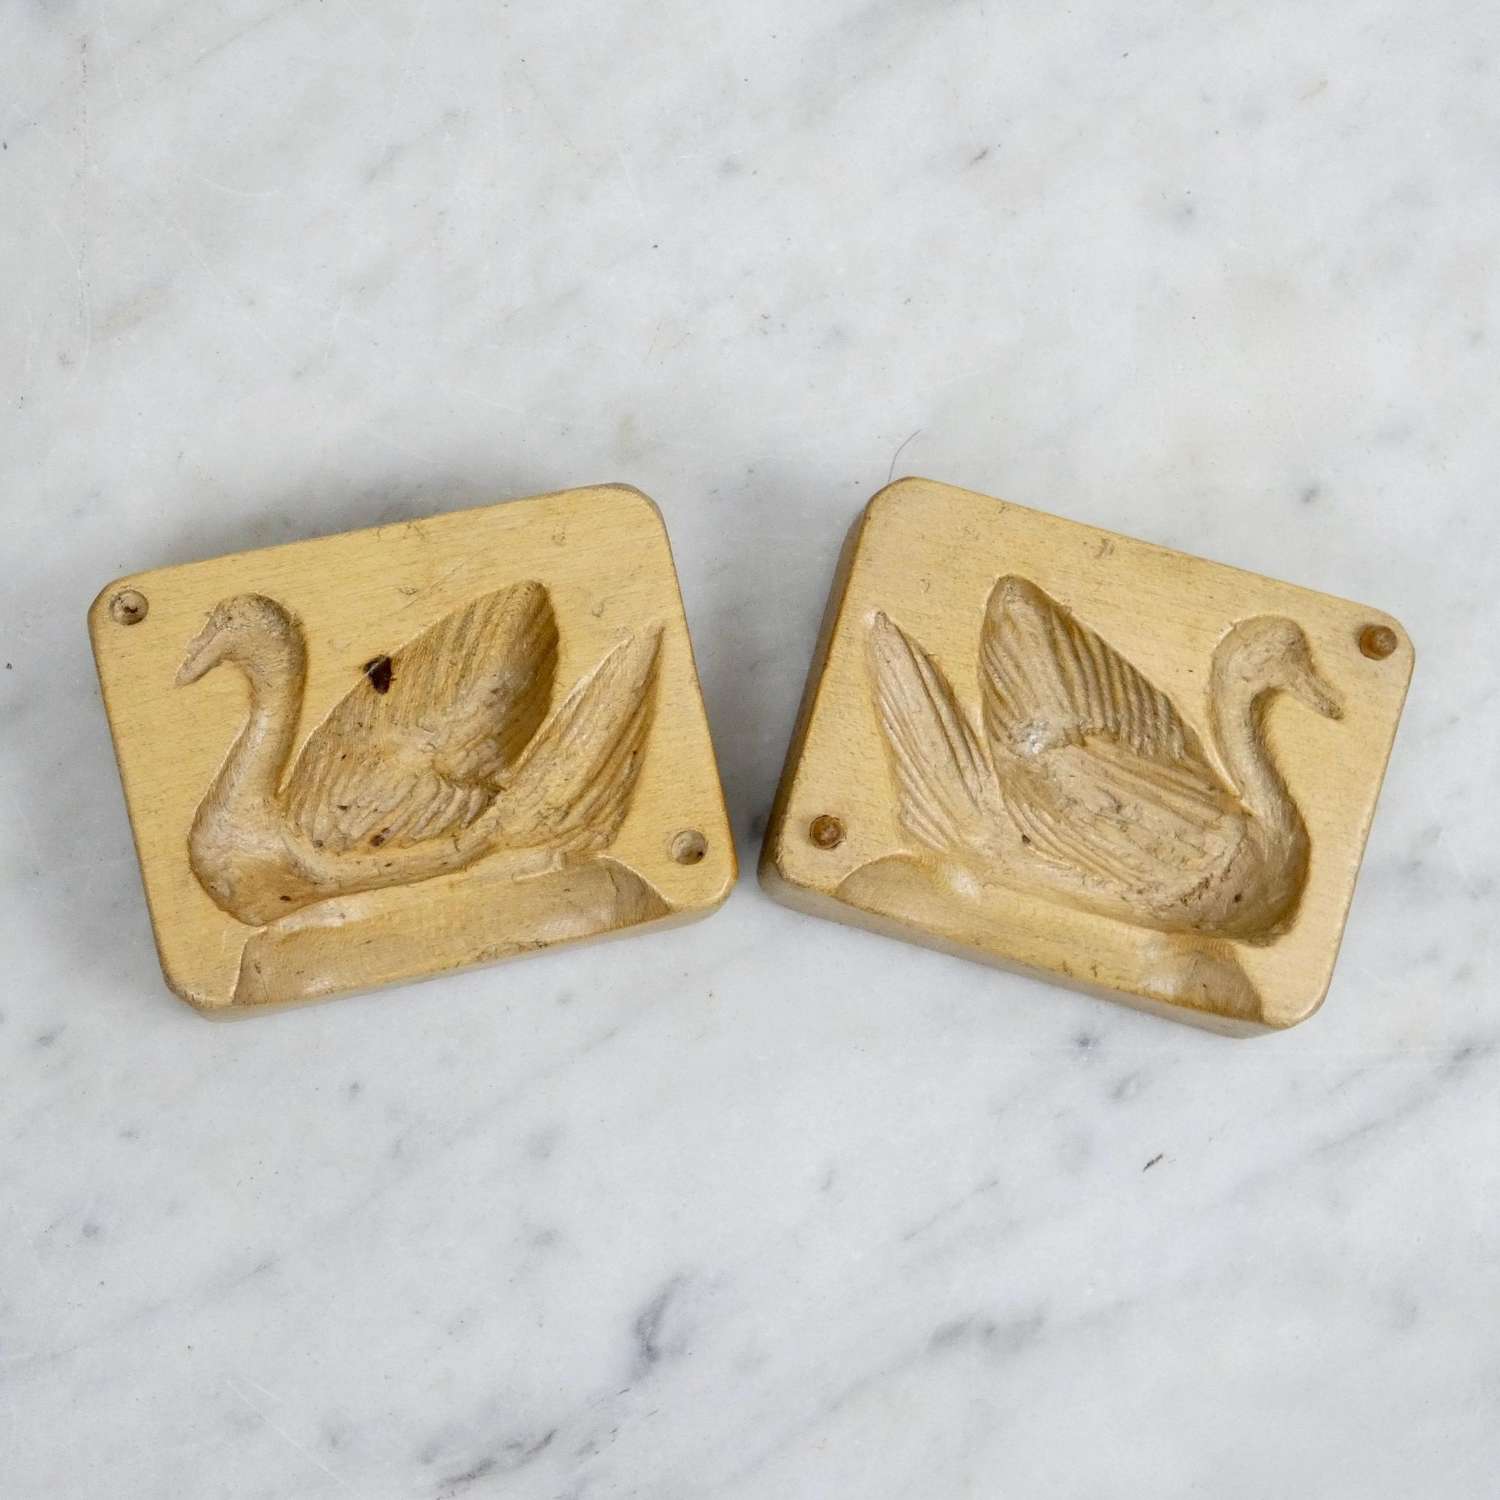 Small, 2 part butter mould